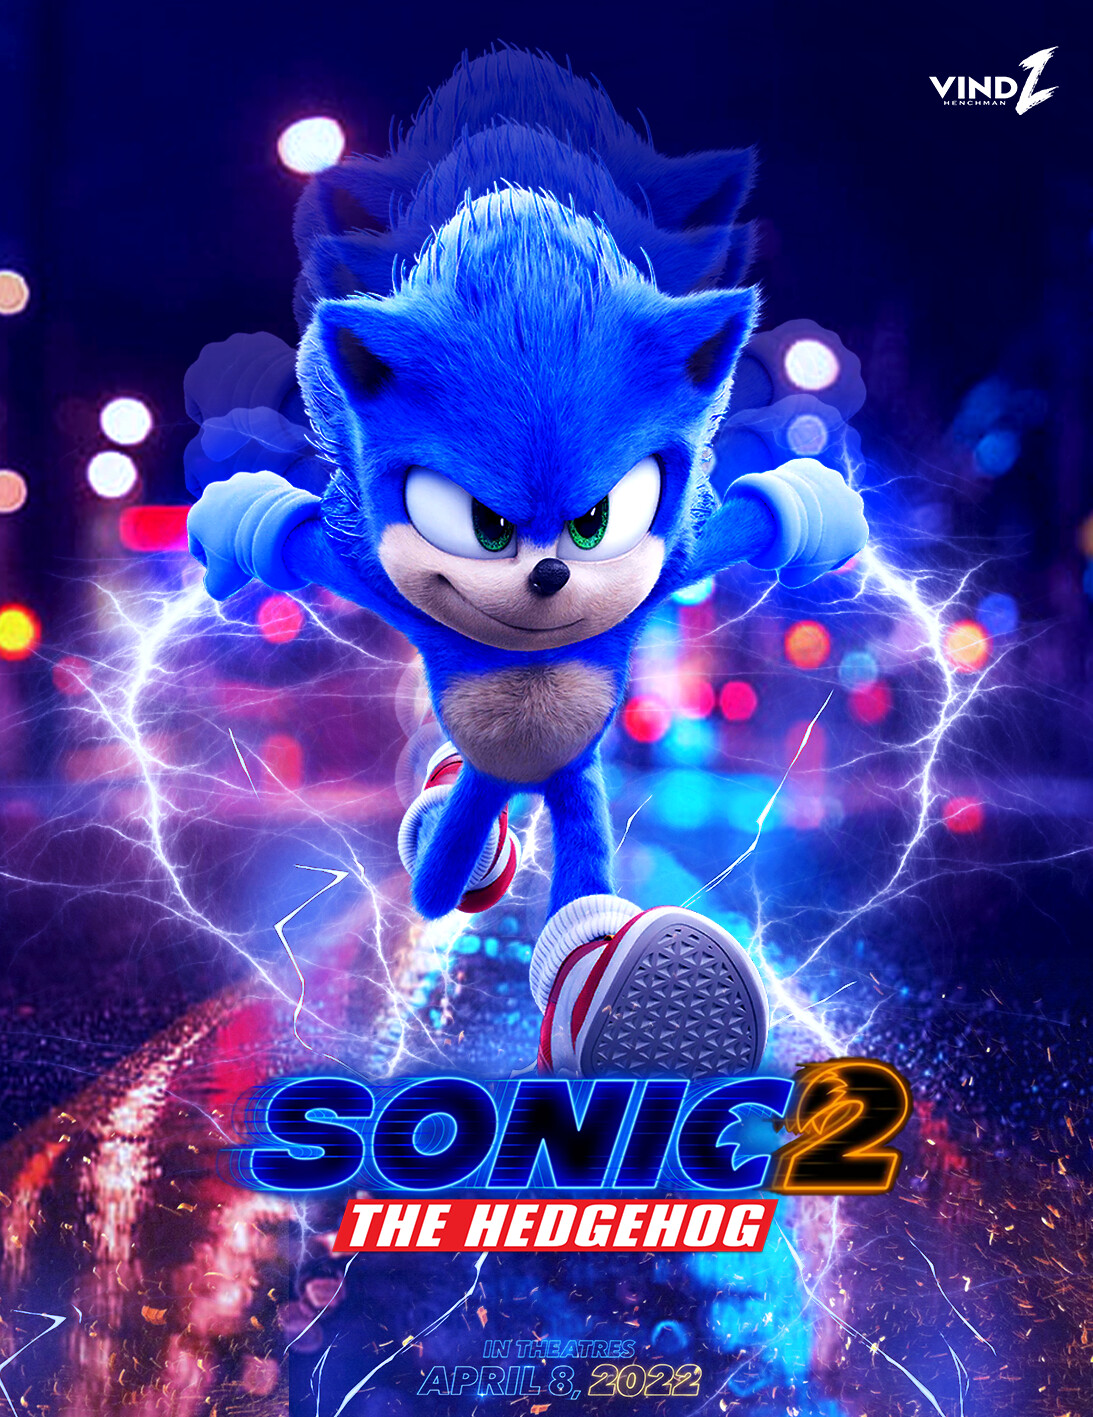 New Sonic the Hedgehog 2 Movie 4DX Poster Revealed – SoaH City